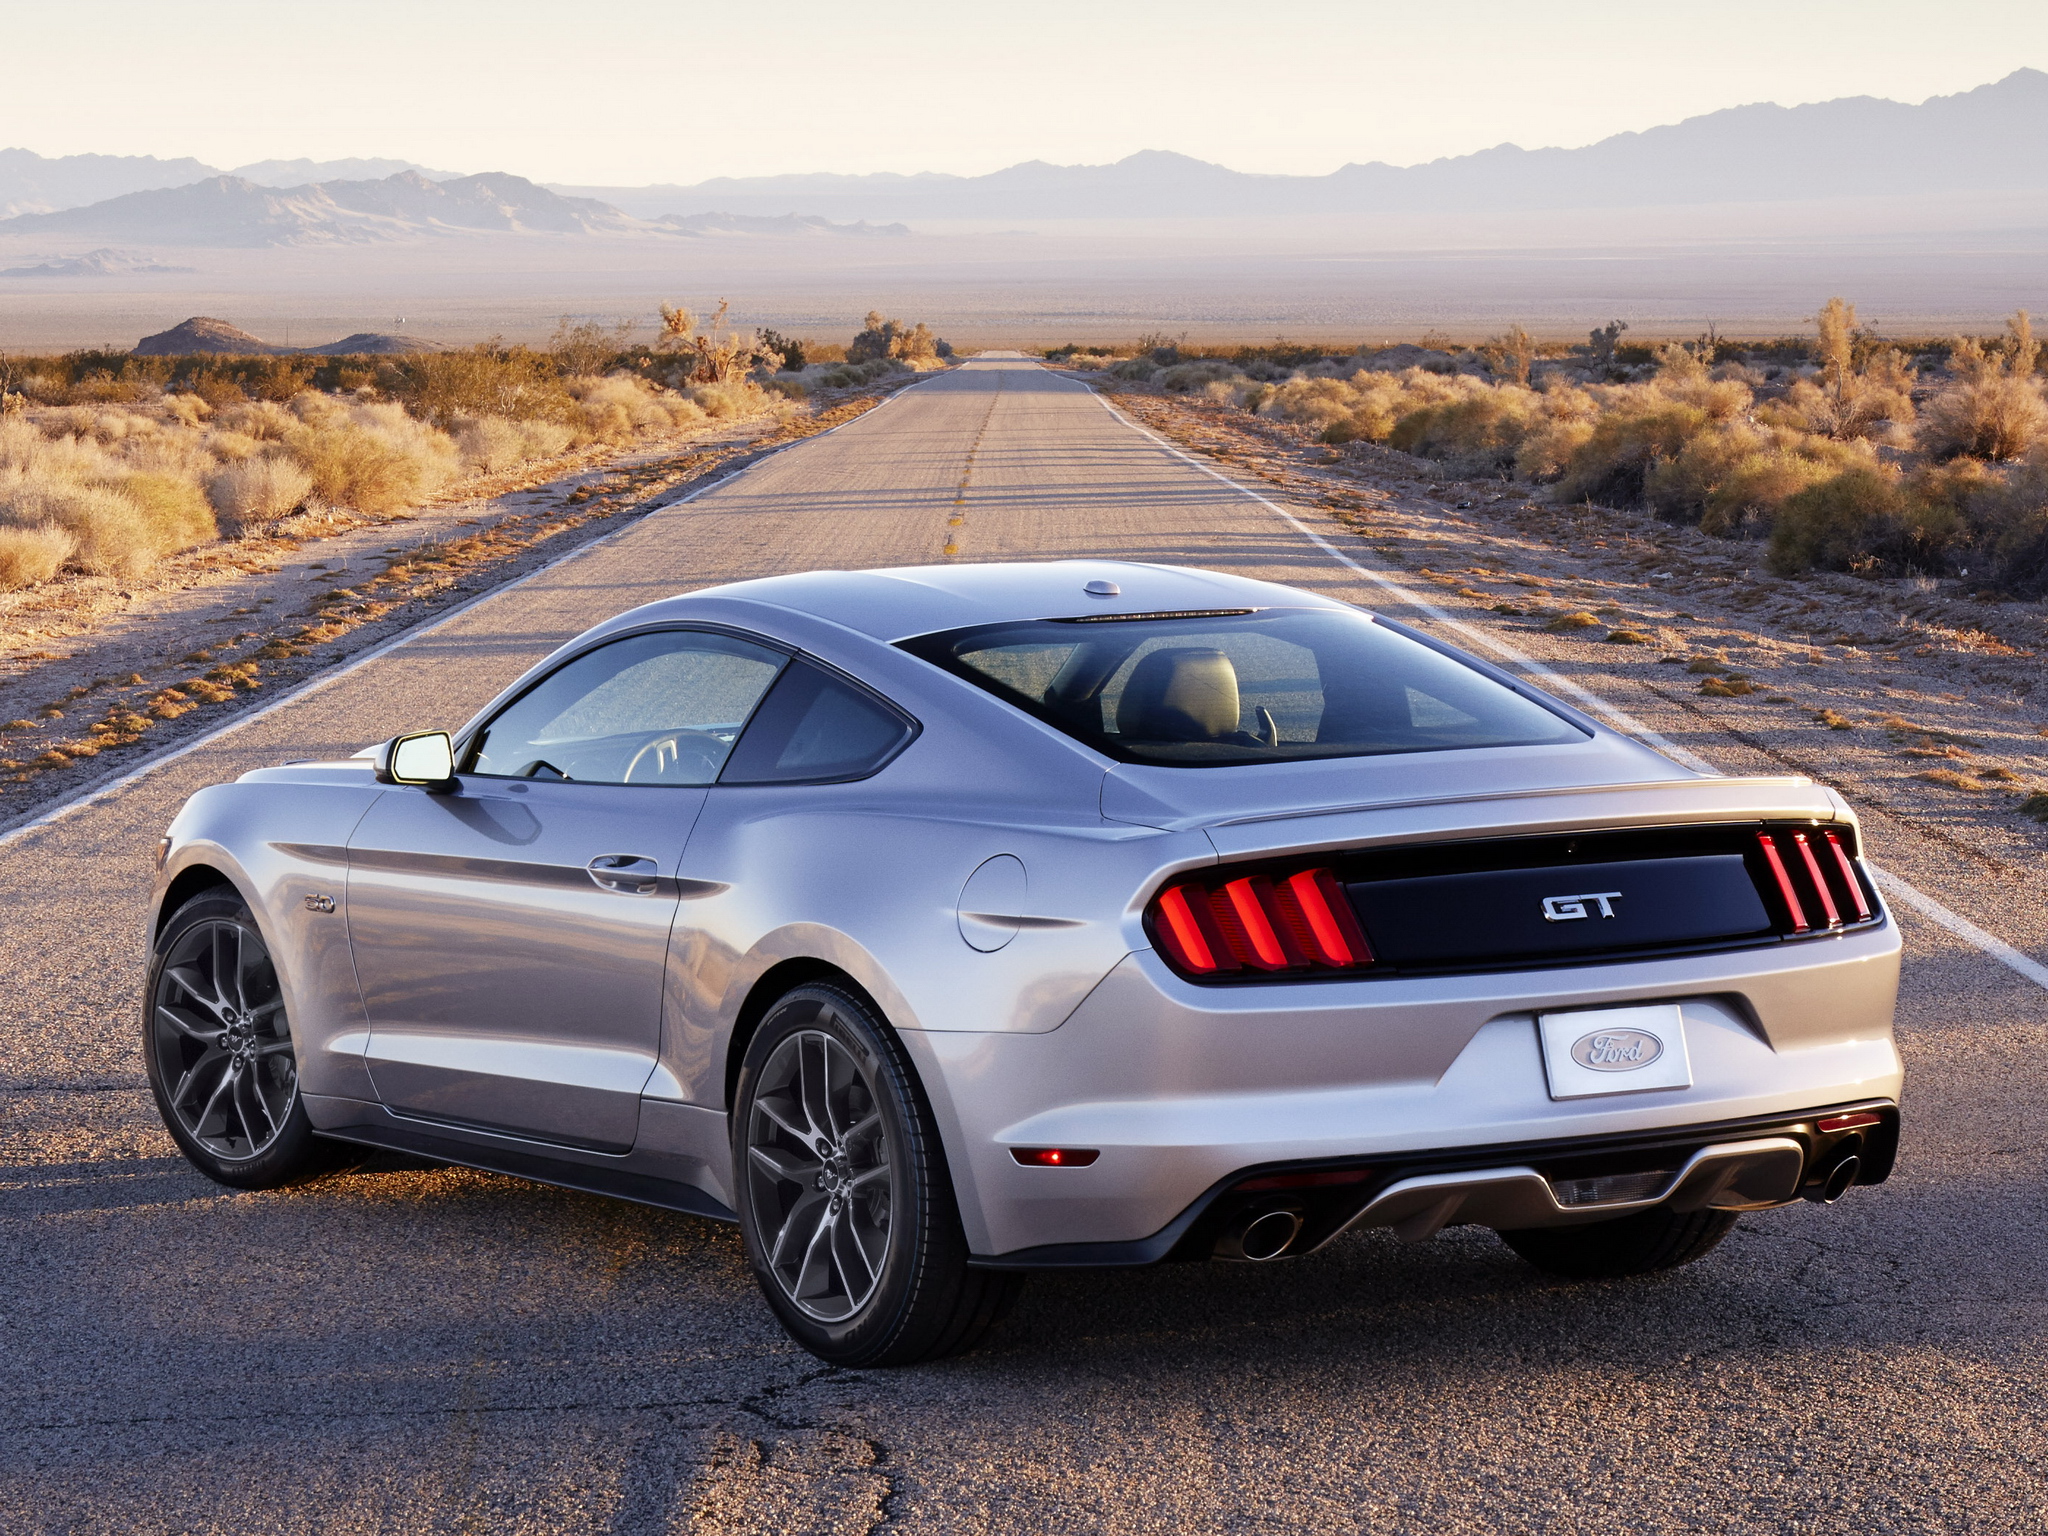 2014, Ford, Mustang, G t, Muscle, Gs Wallpaper